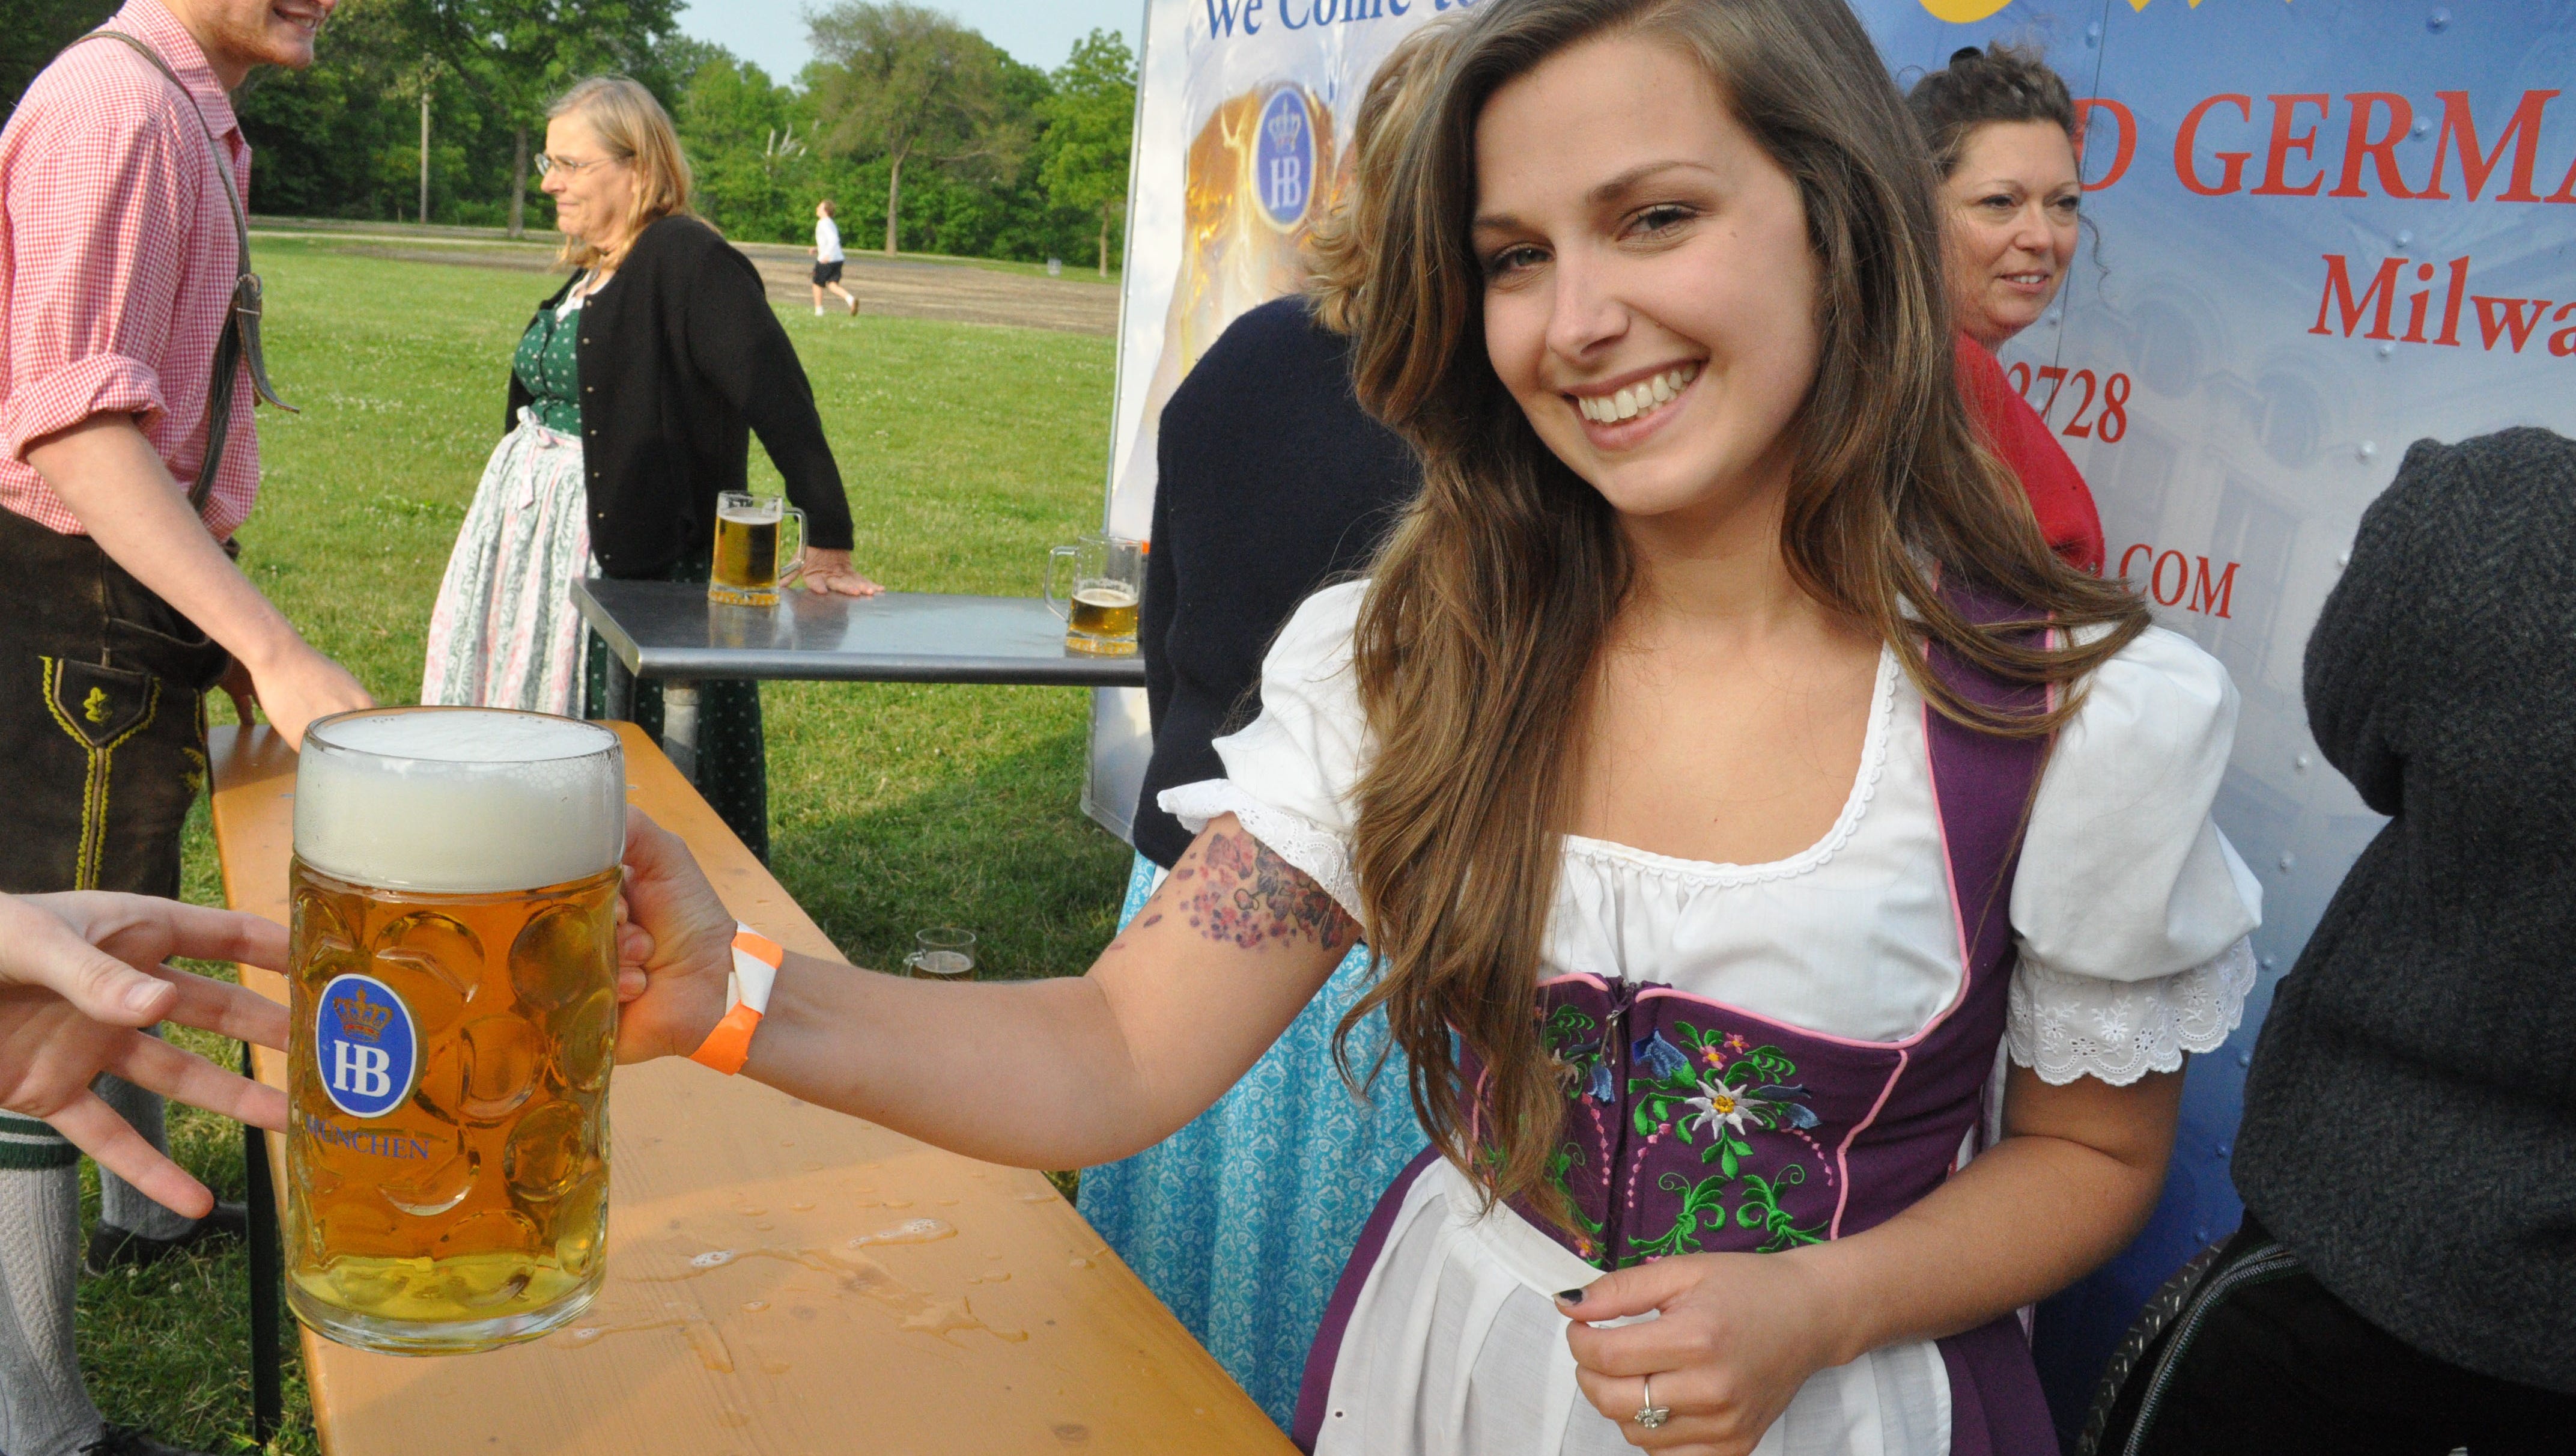 Beer Garden At Estabrook Park Opens For German Beer Day And More